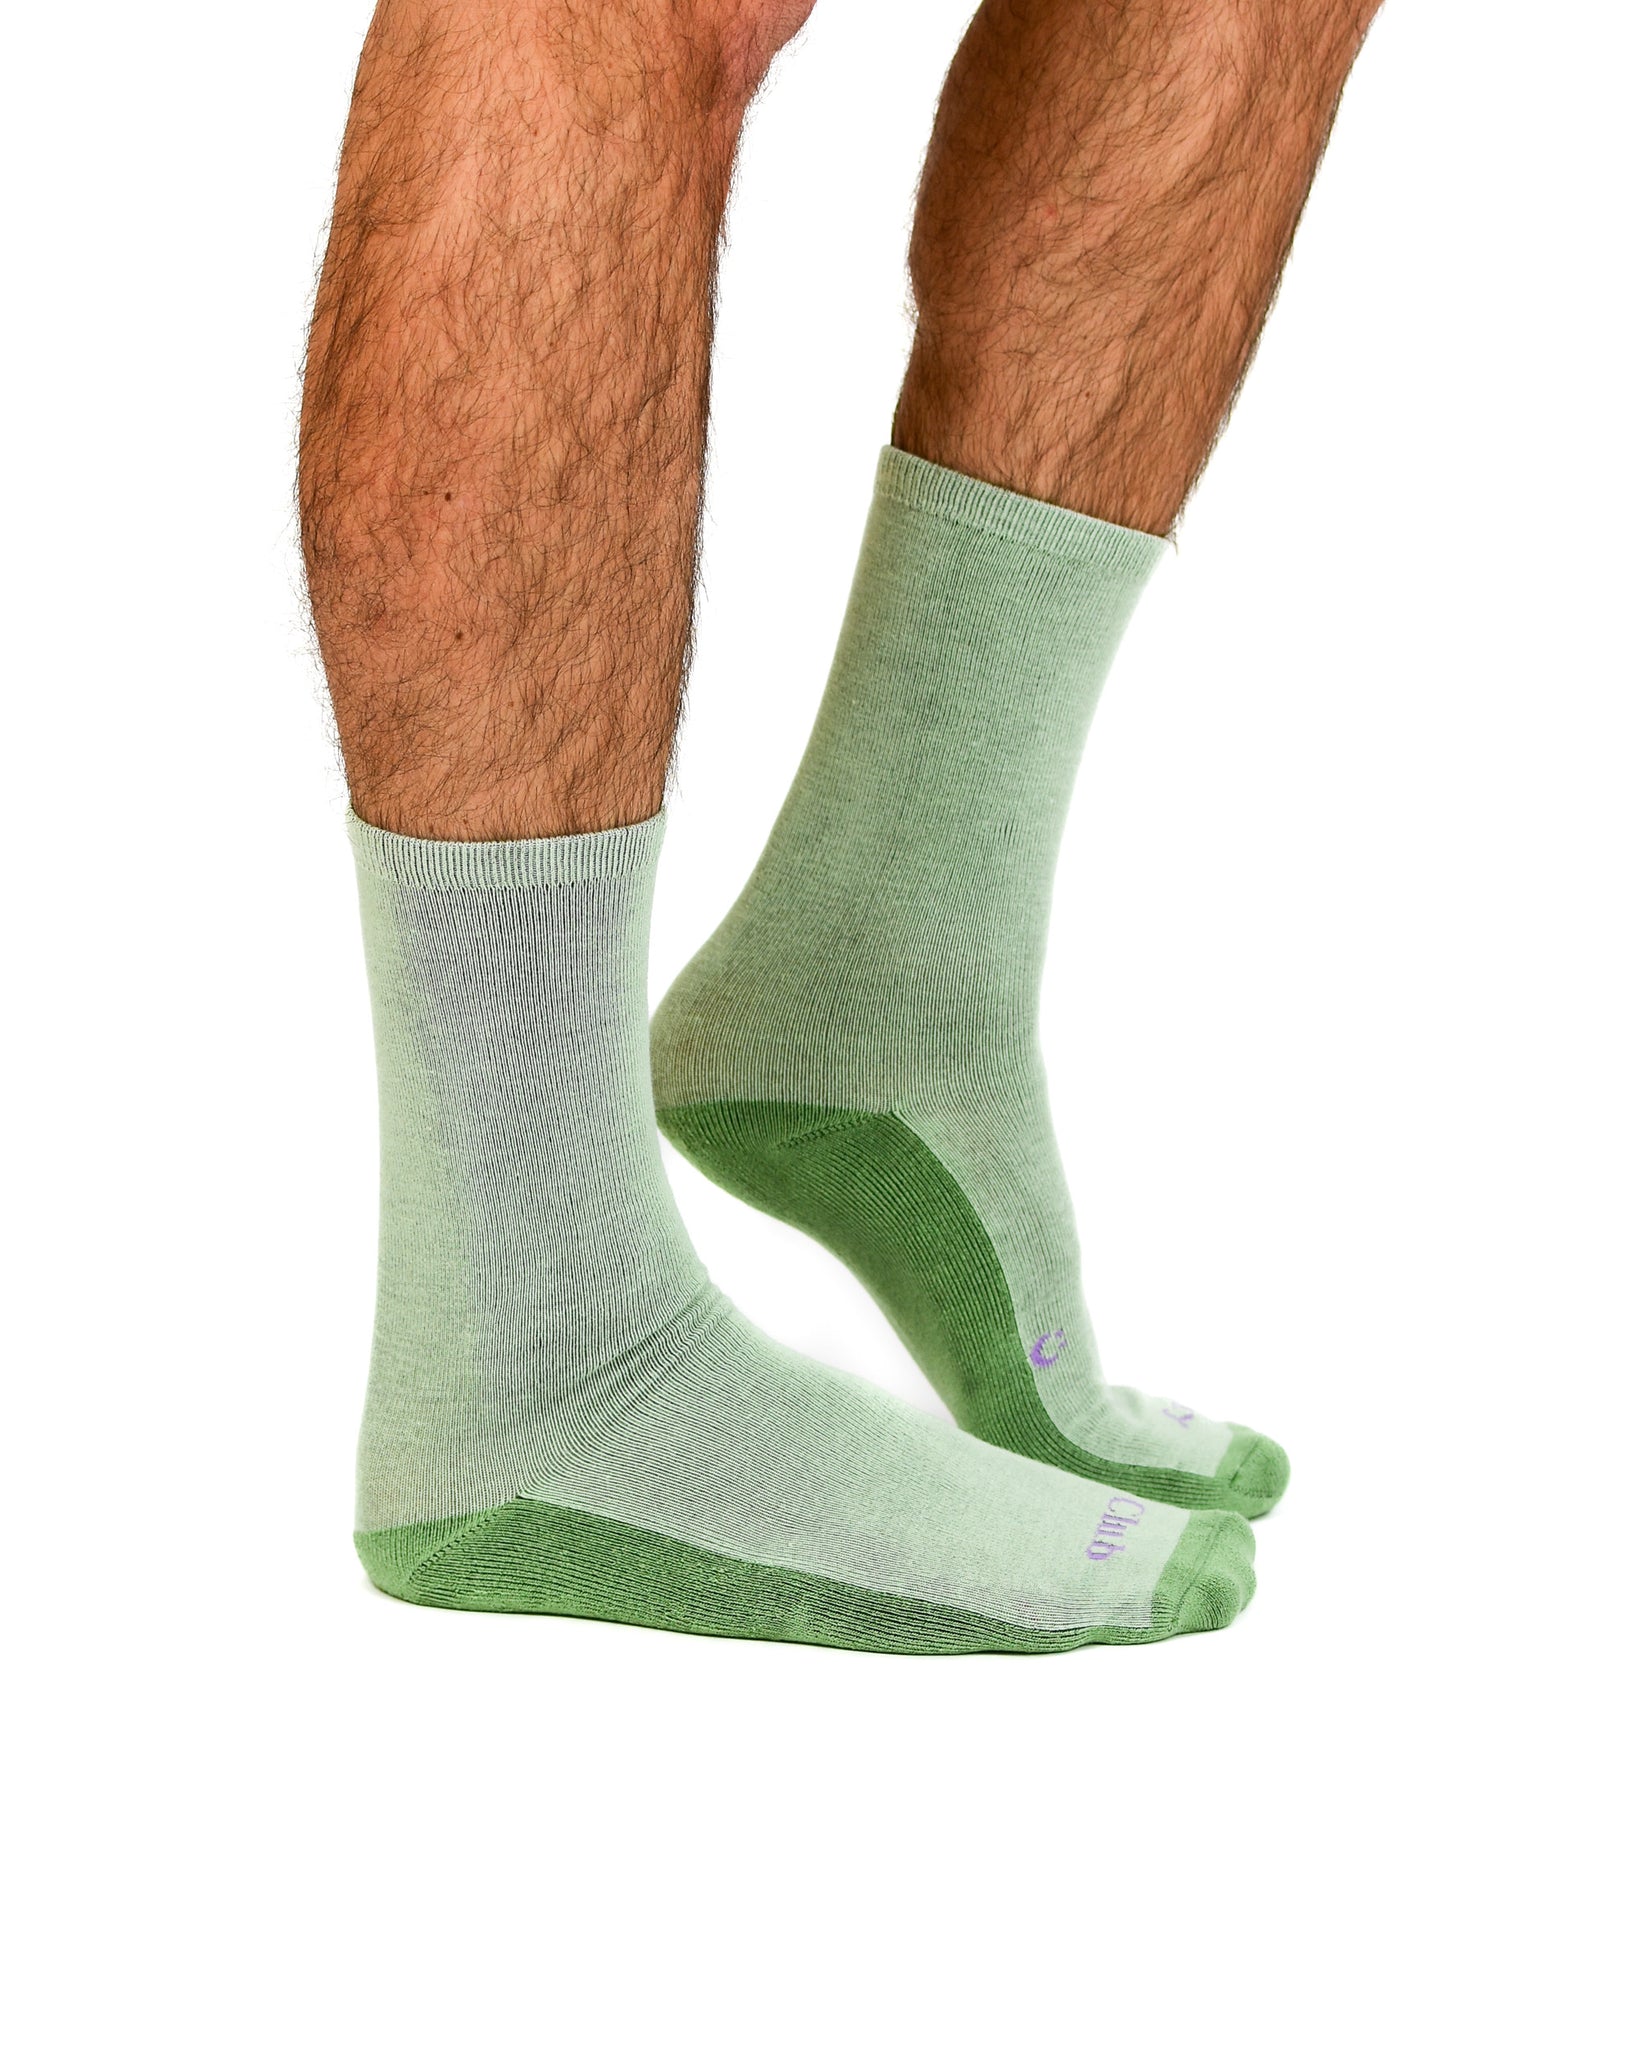 Everyday Crew Seamless Feel Sock 4 Pack (Adults) - Pastel Multi